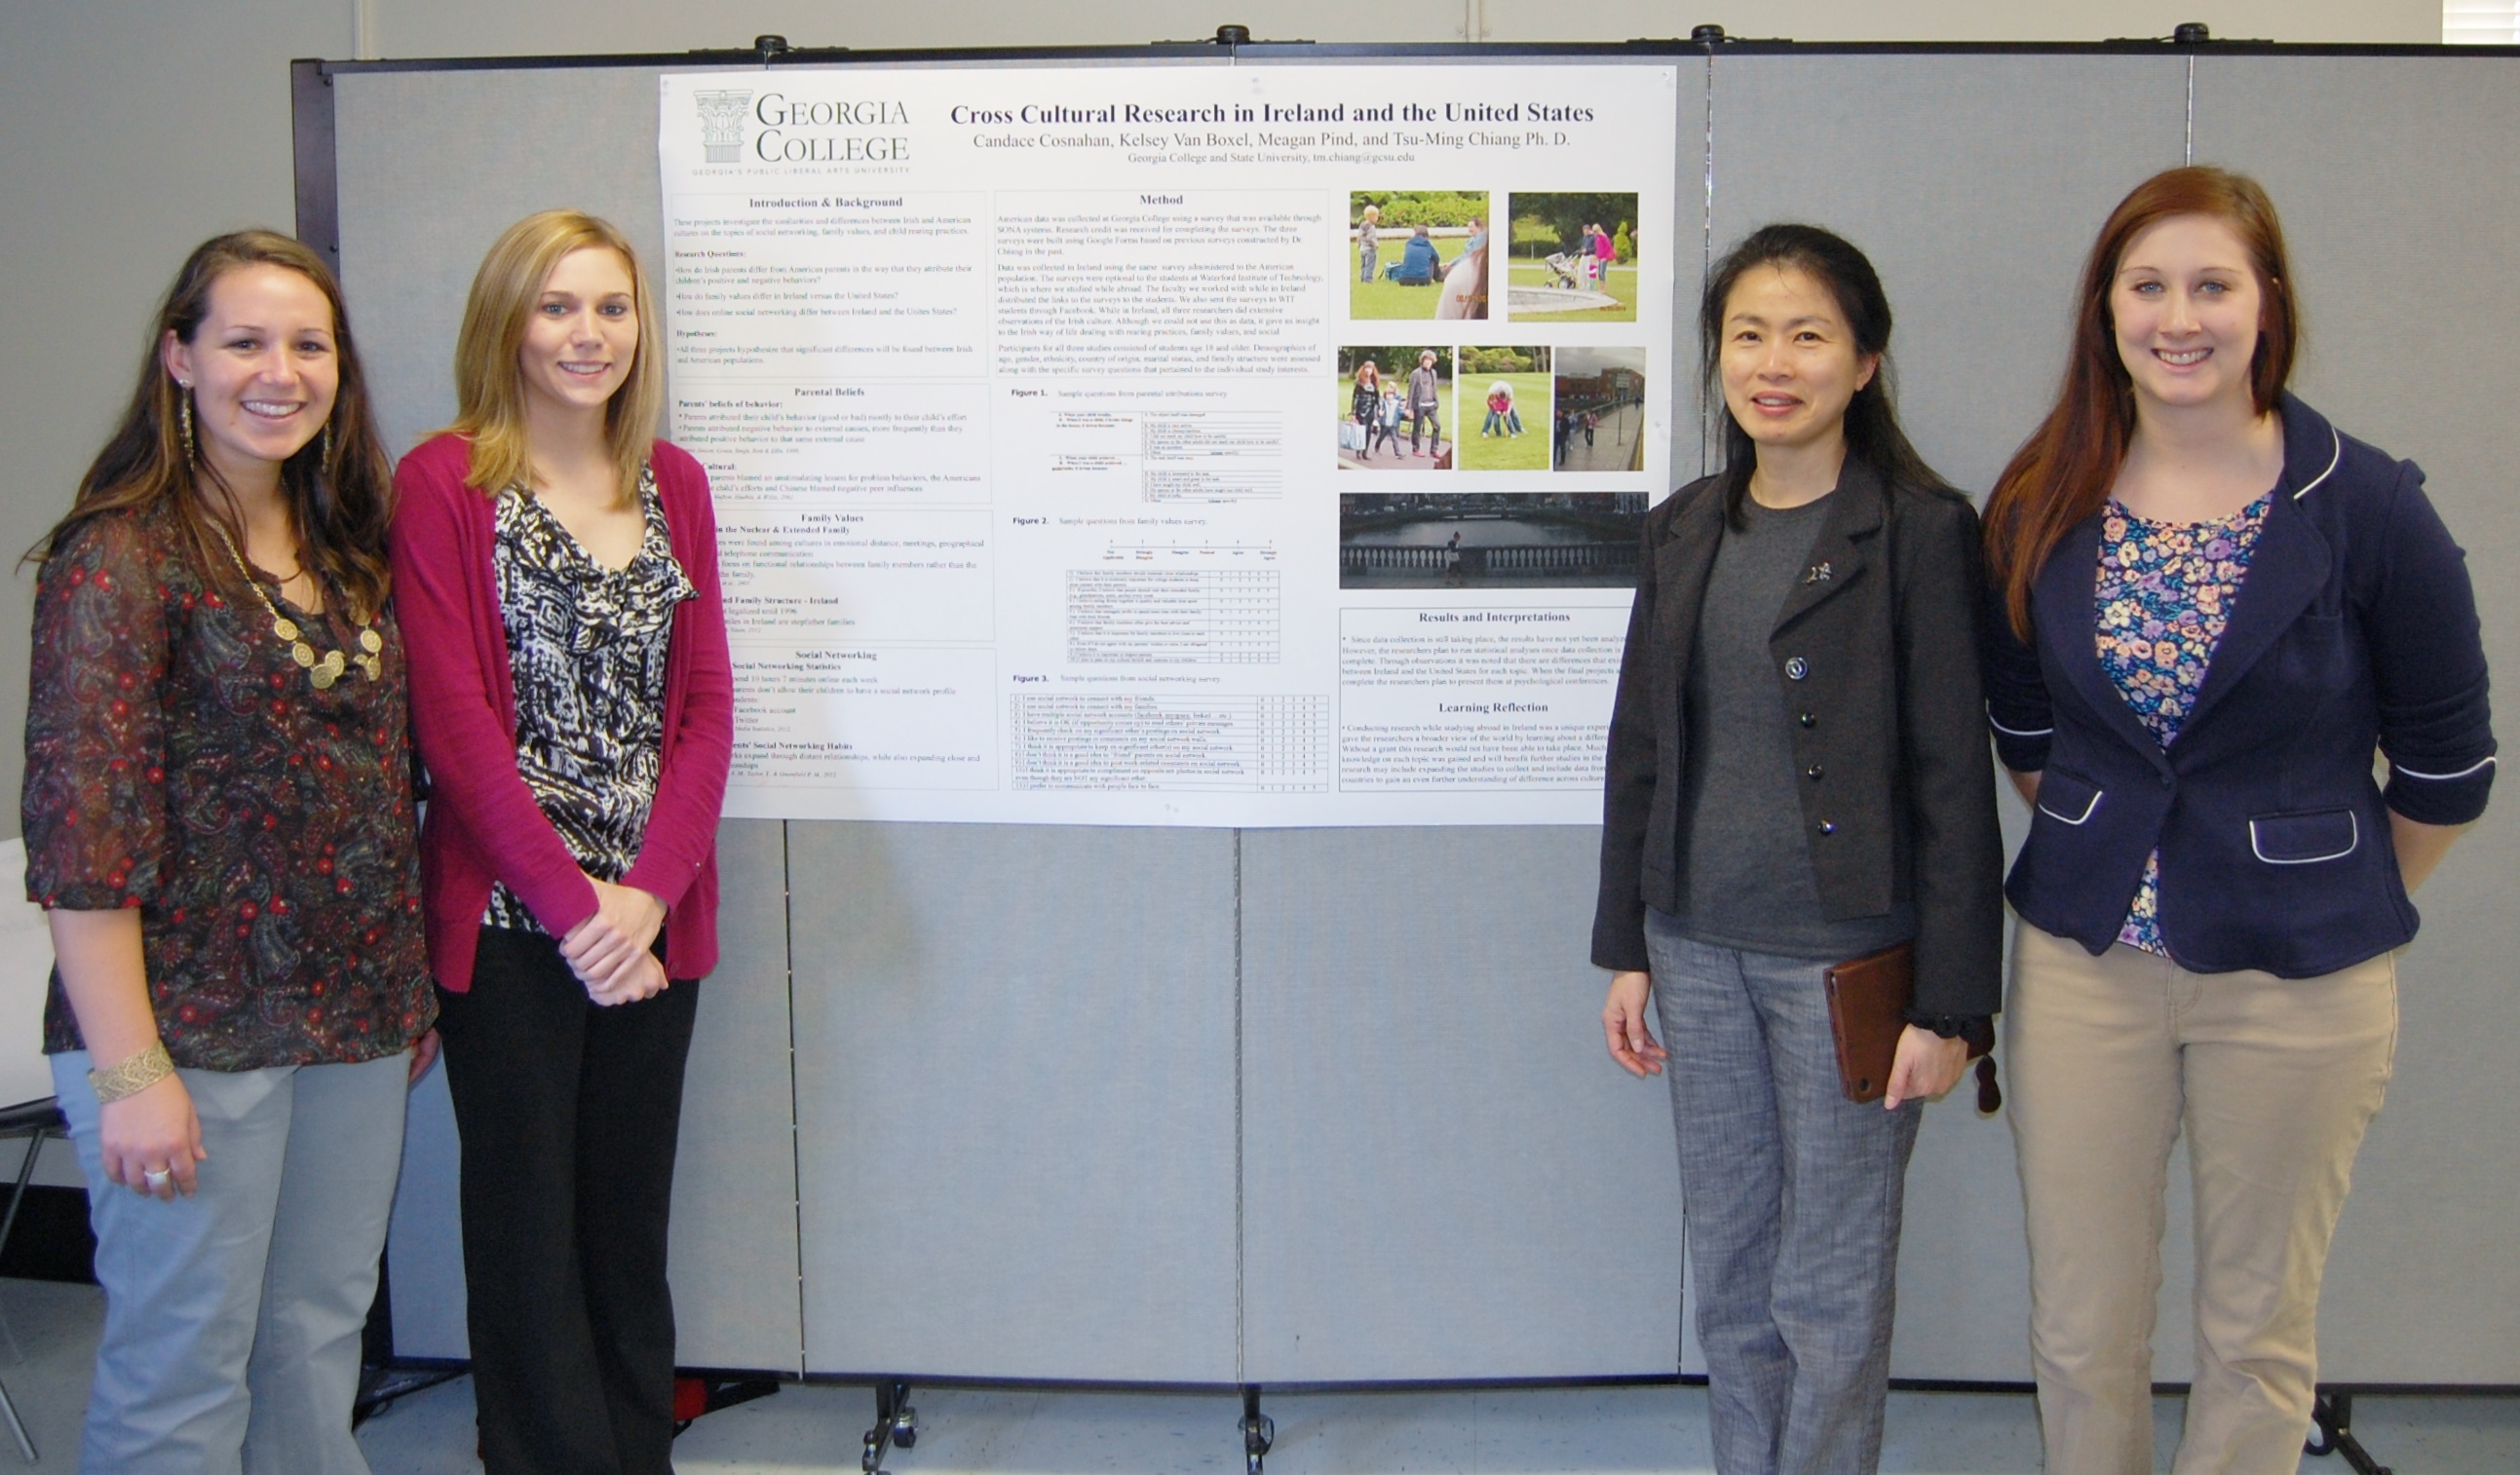 (left to right) 2015 summer scholars Candace Cosnahan, Kelsey Van Boxel, their mentor Dr. Tsu-Ming Chiang, and summer scholar Megan Pind.